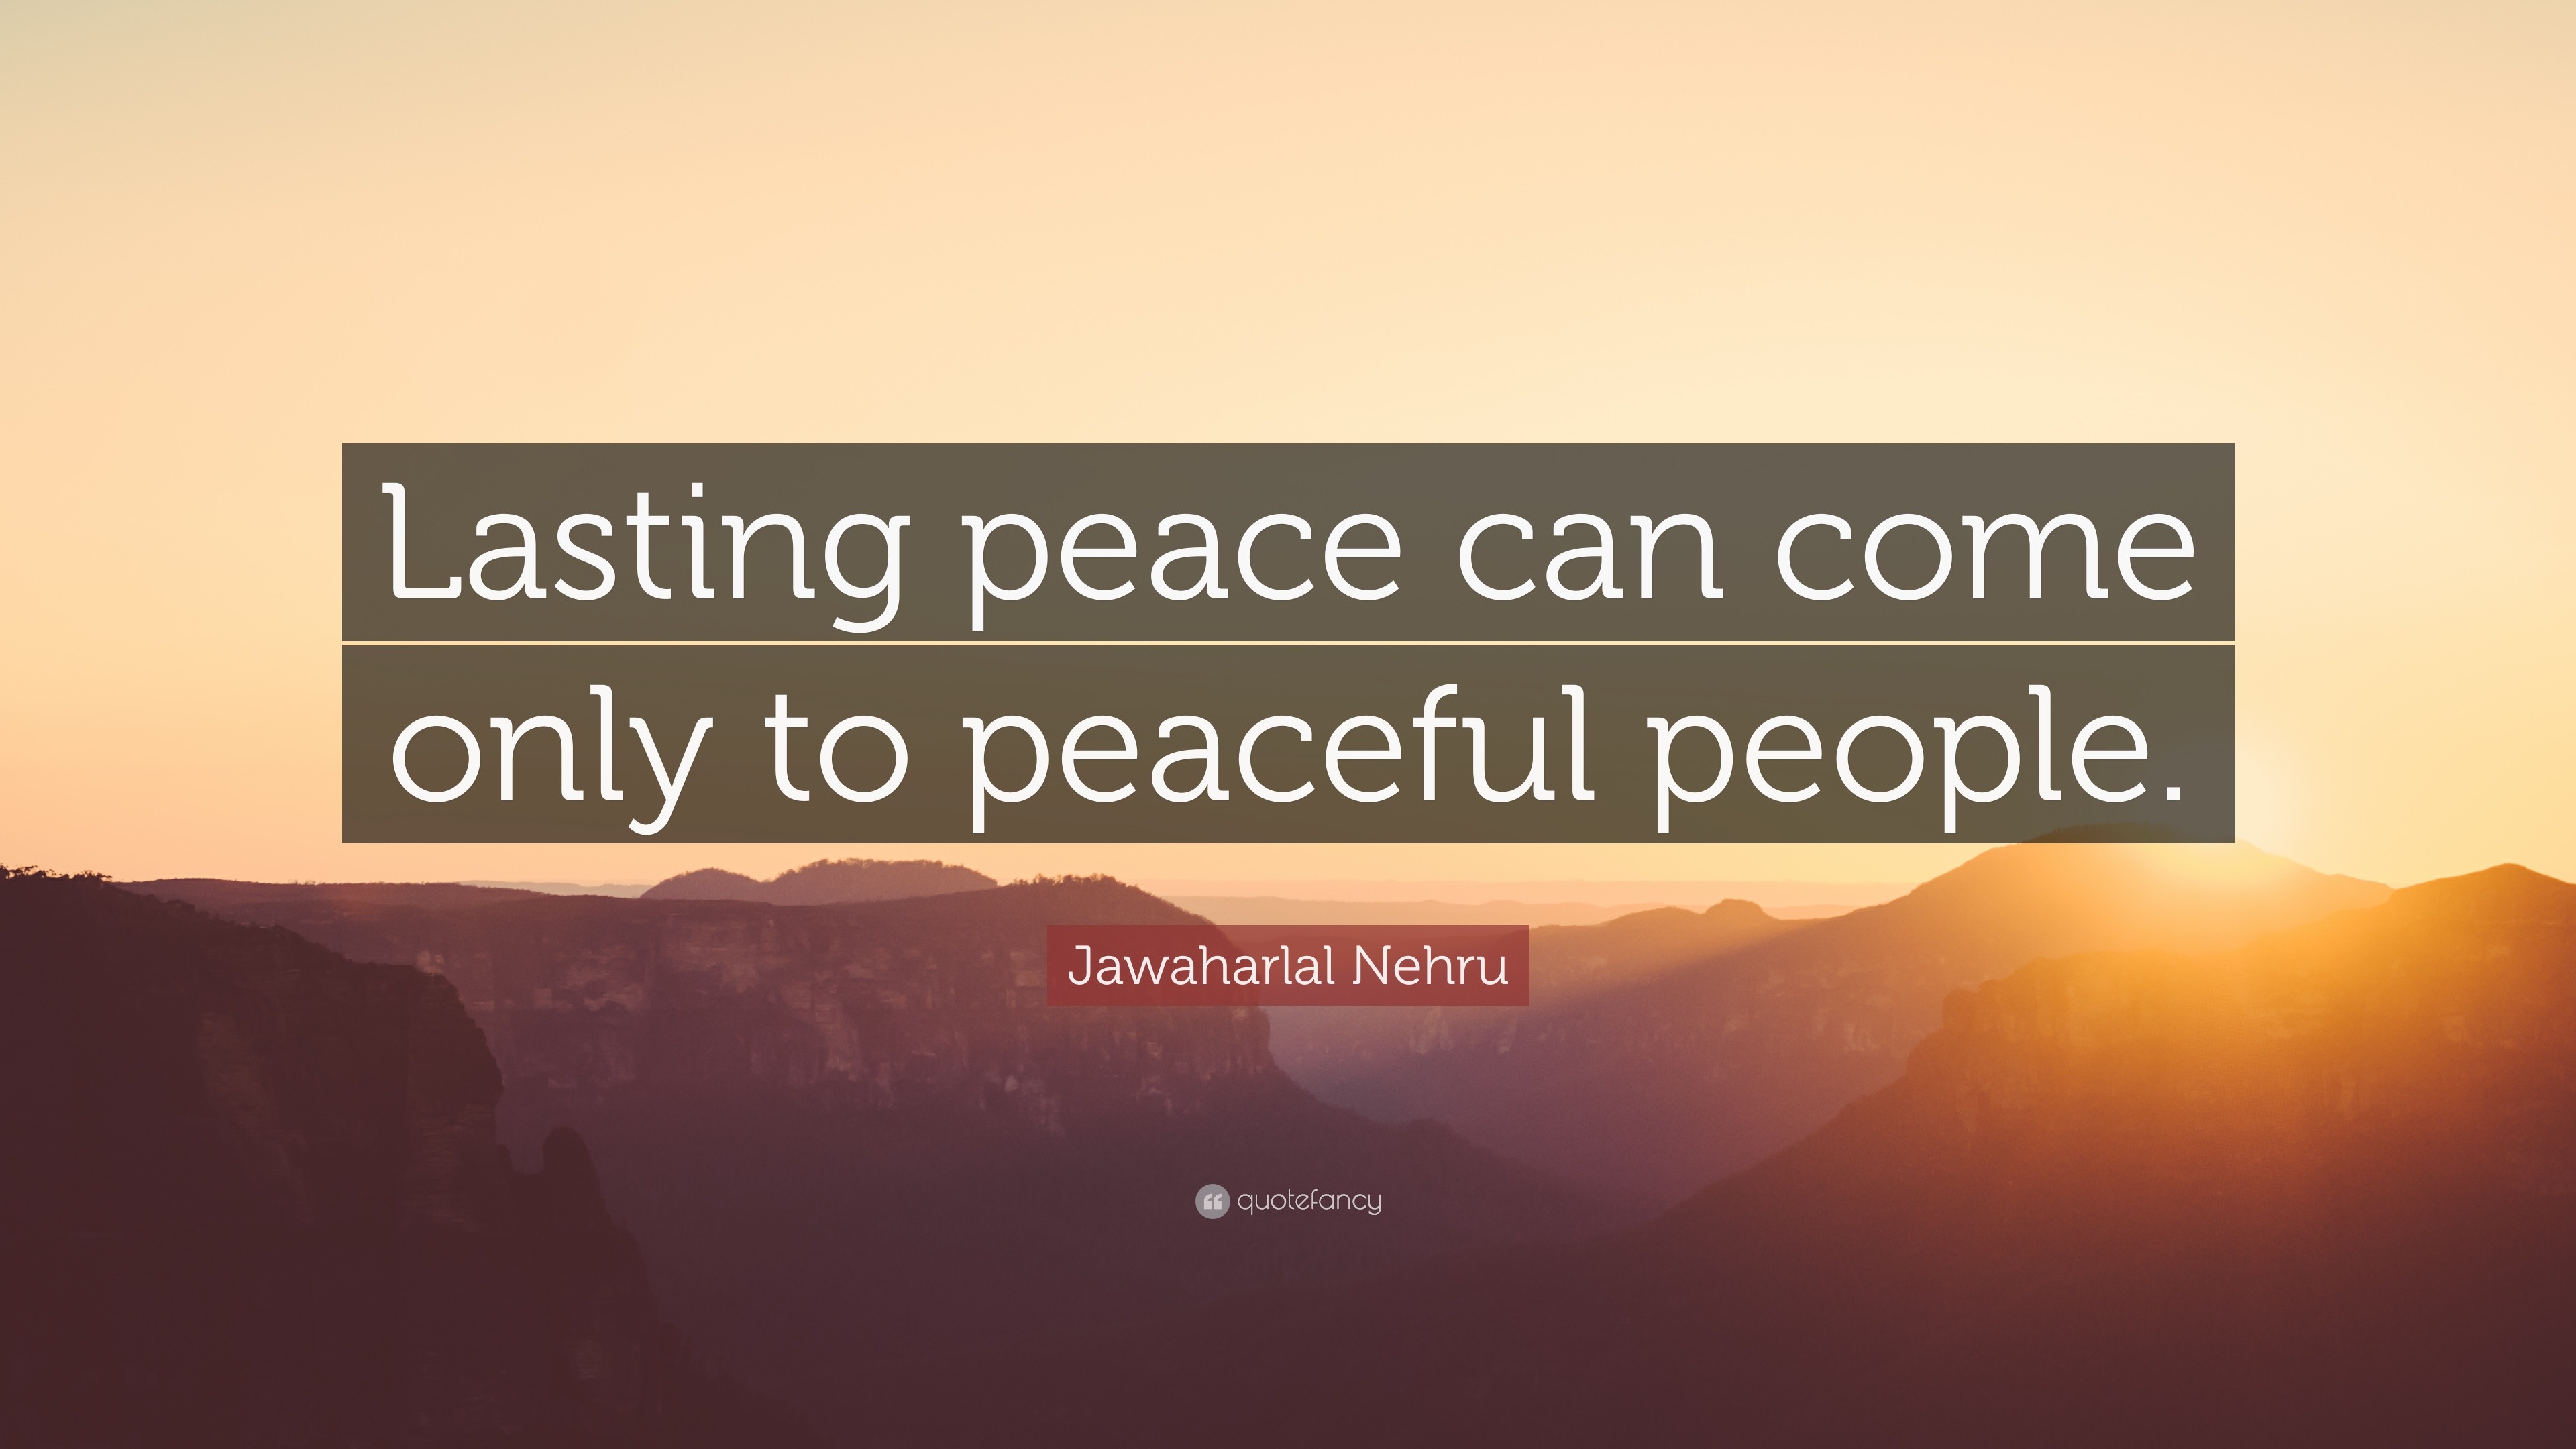 Jawaharlal Nehru Quote: “Lasting peace can come only to peaceful people.”